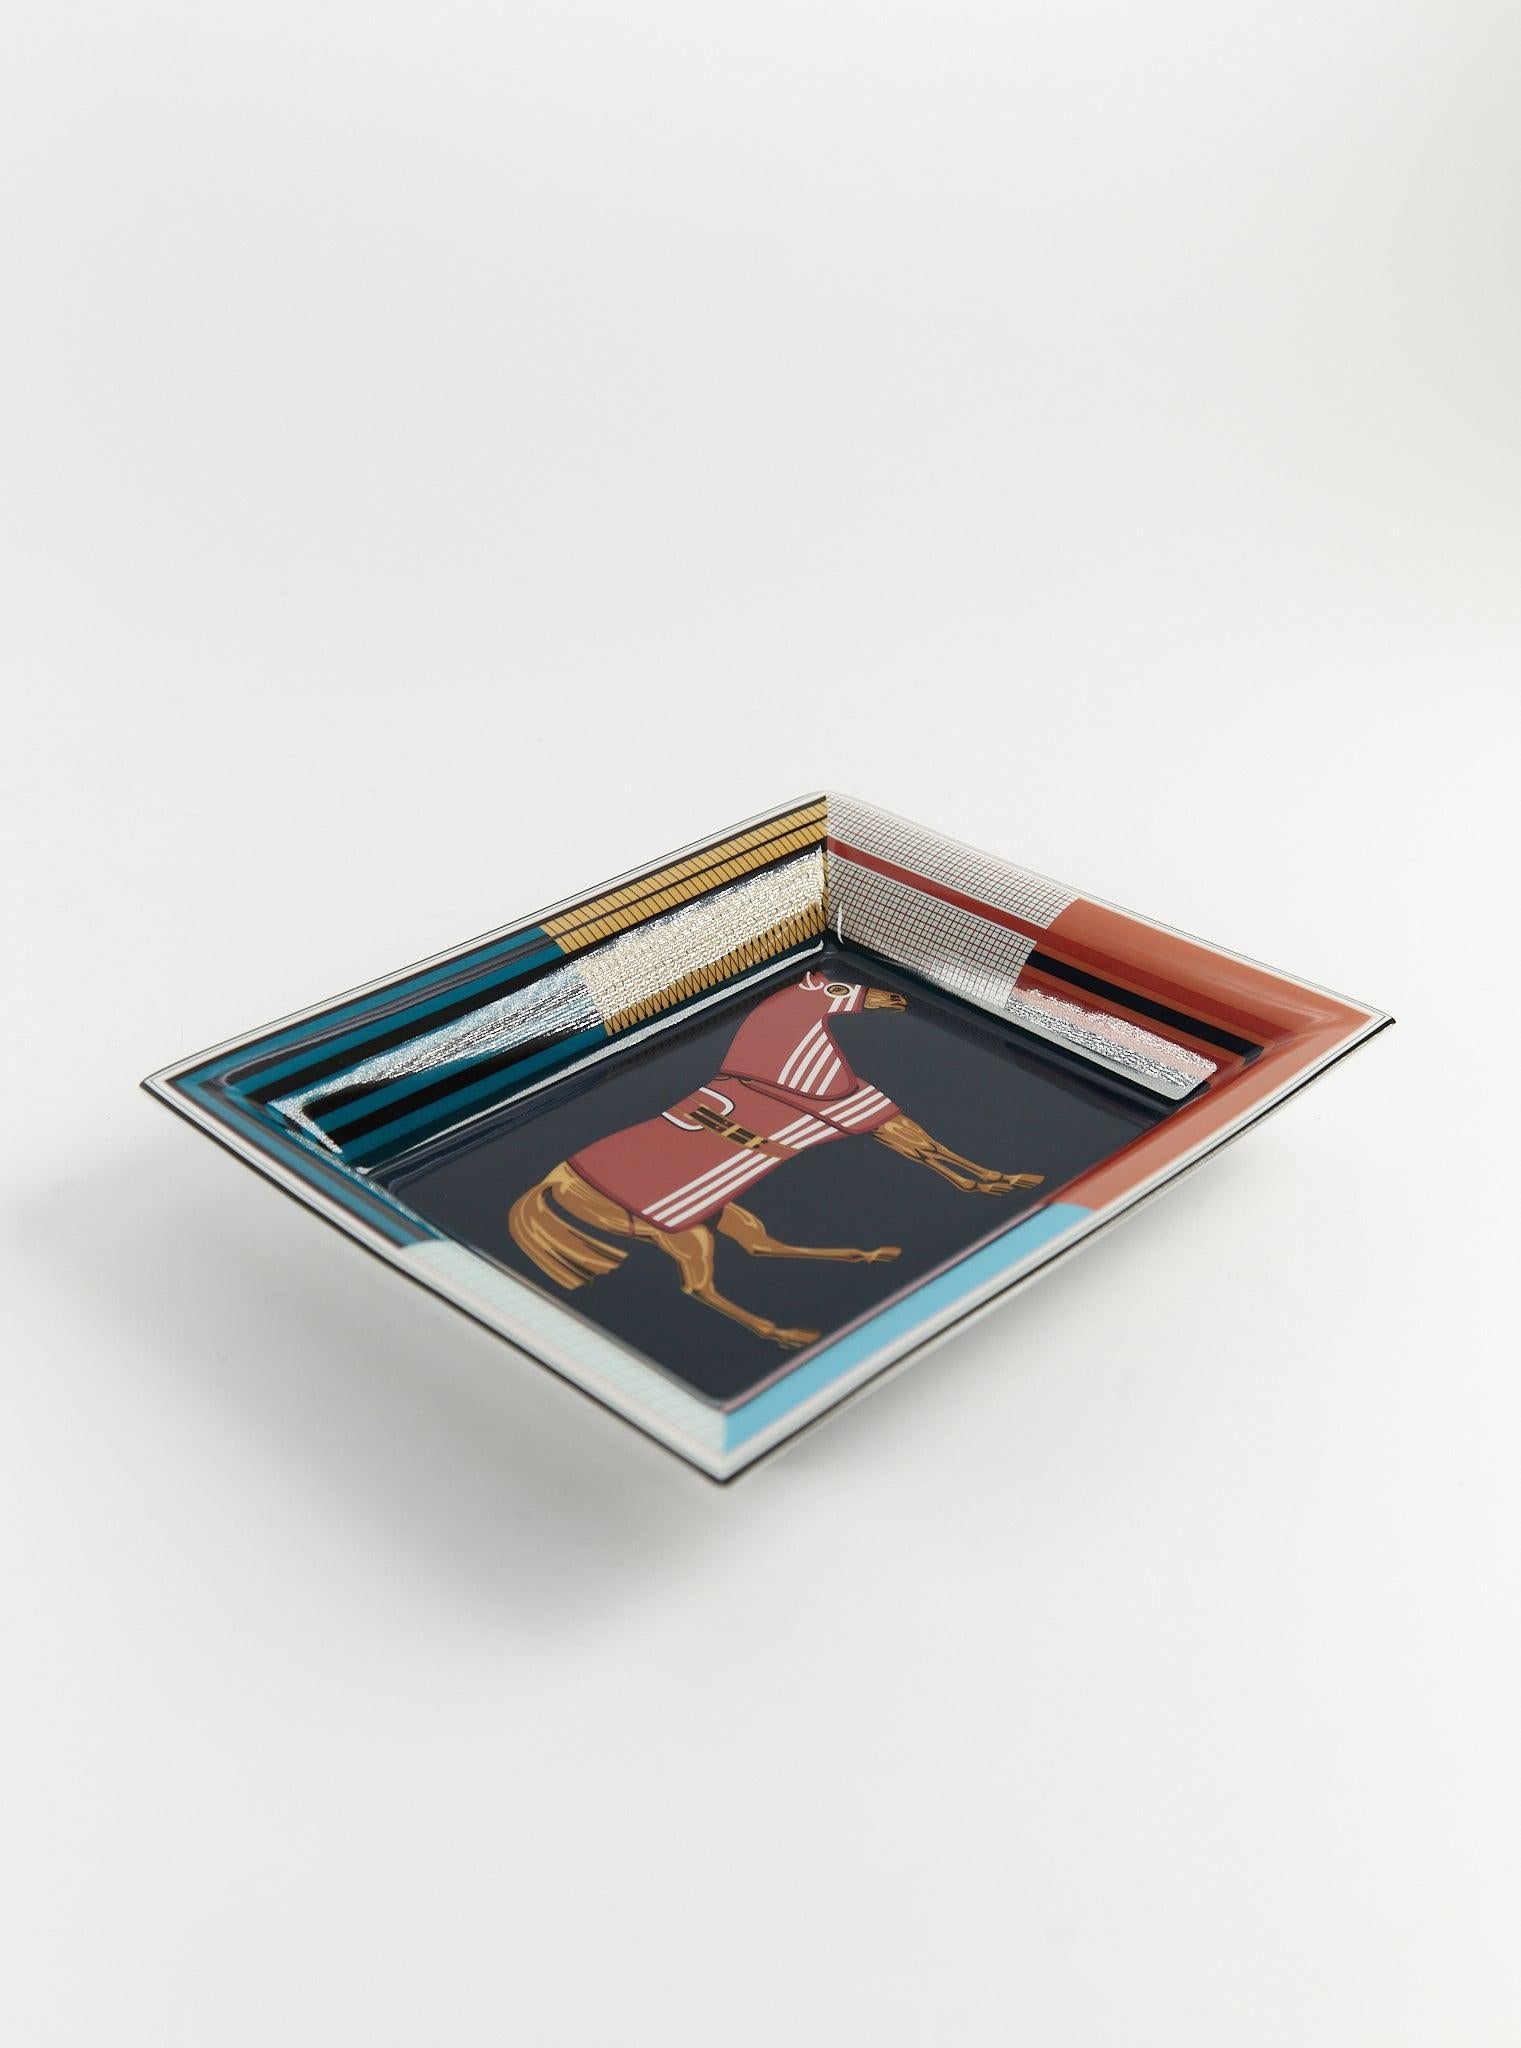 Hermès Rocabar a Cheval change tray in porcelain with velvet goatskin base

Decorated using chromolithography

Made in France

Dimensions: L 21 x W 17 cm